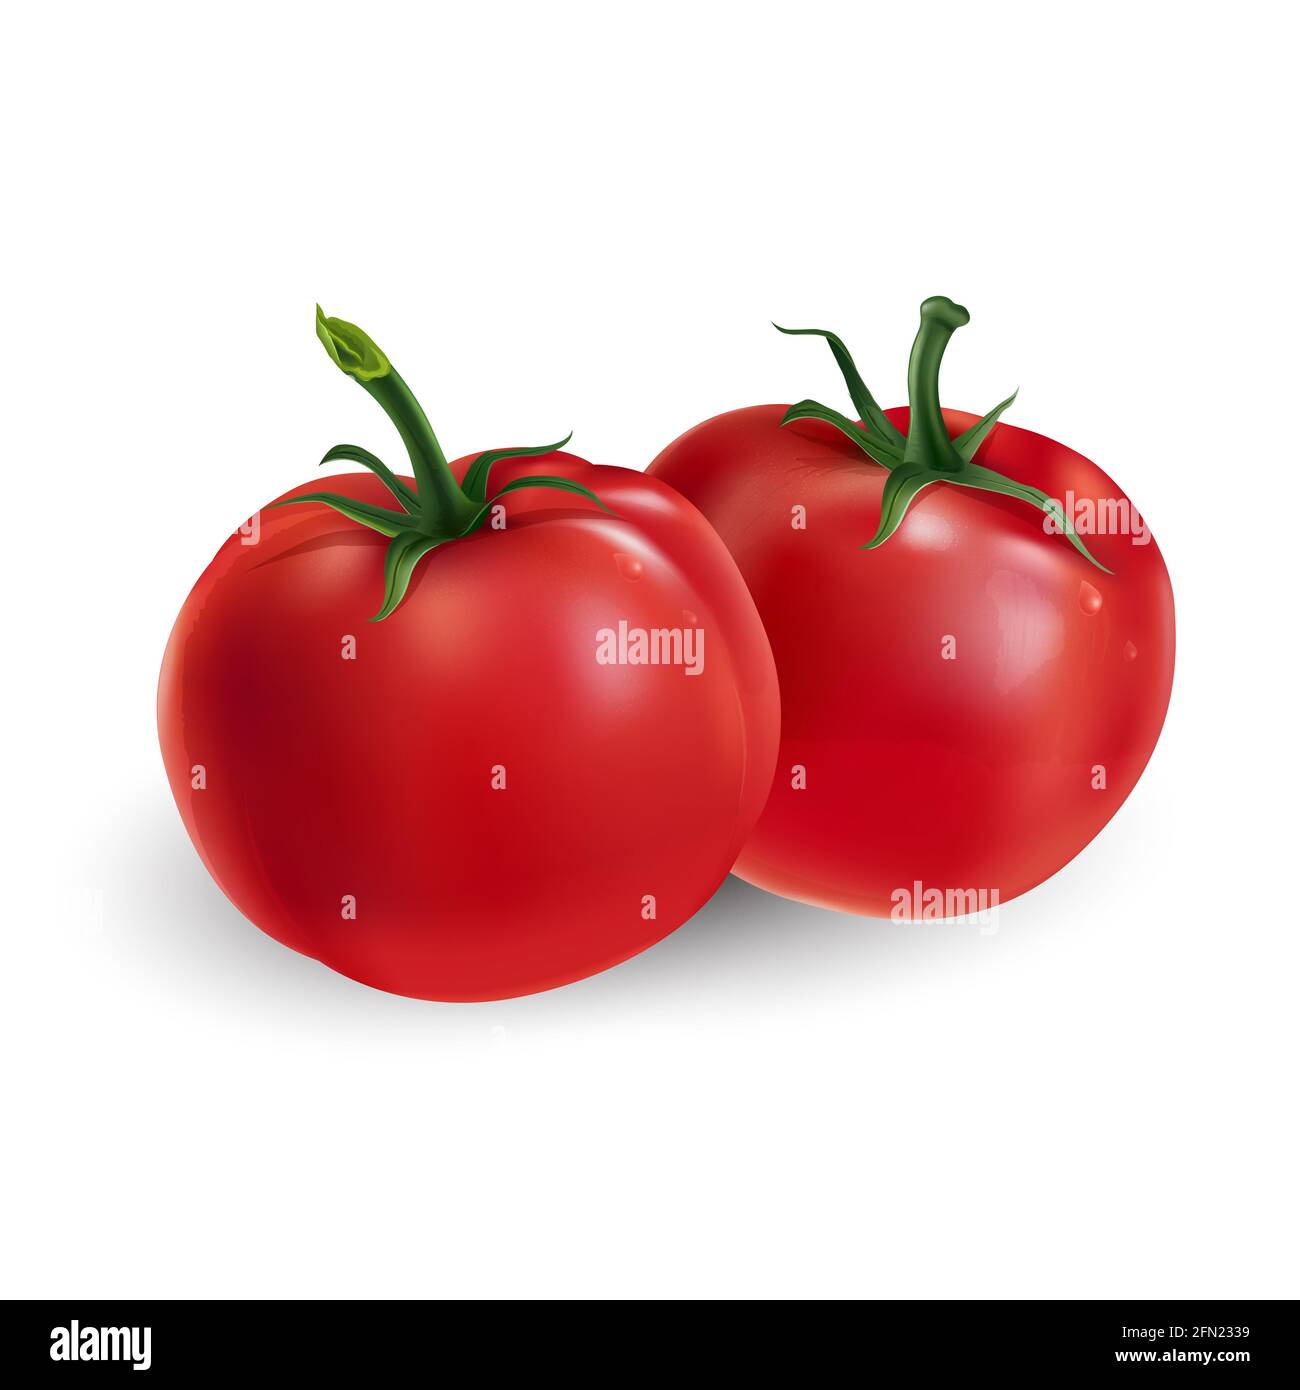 Two red tomatoes on a white background. Stock Photo